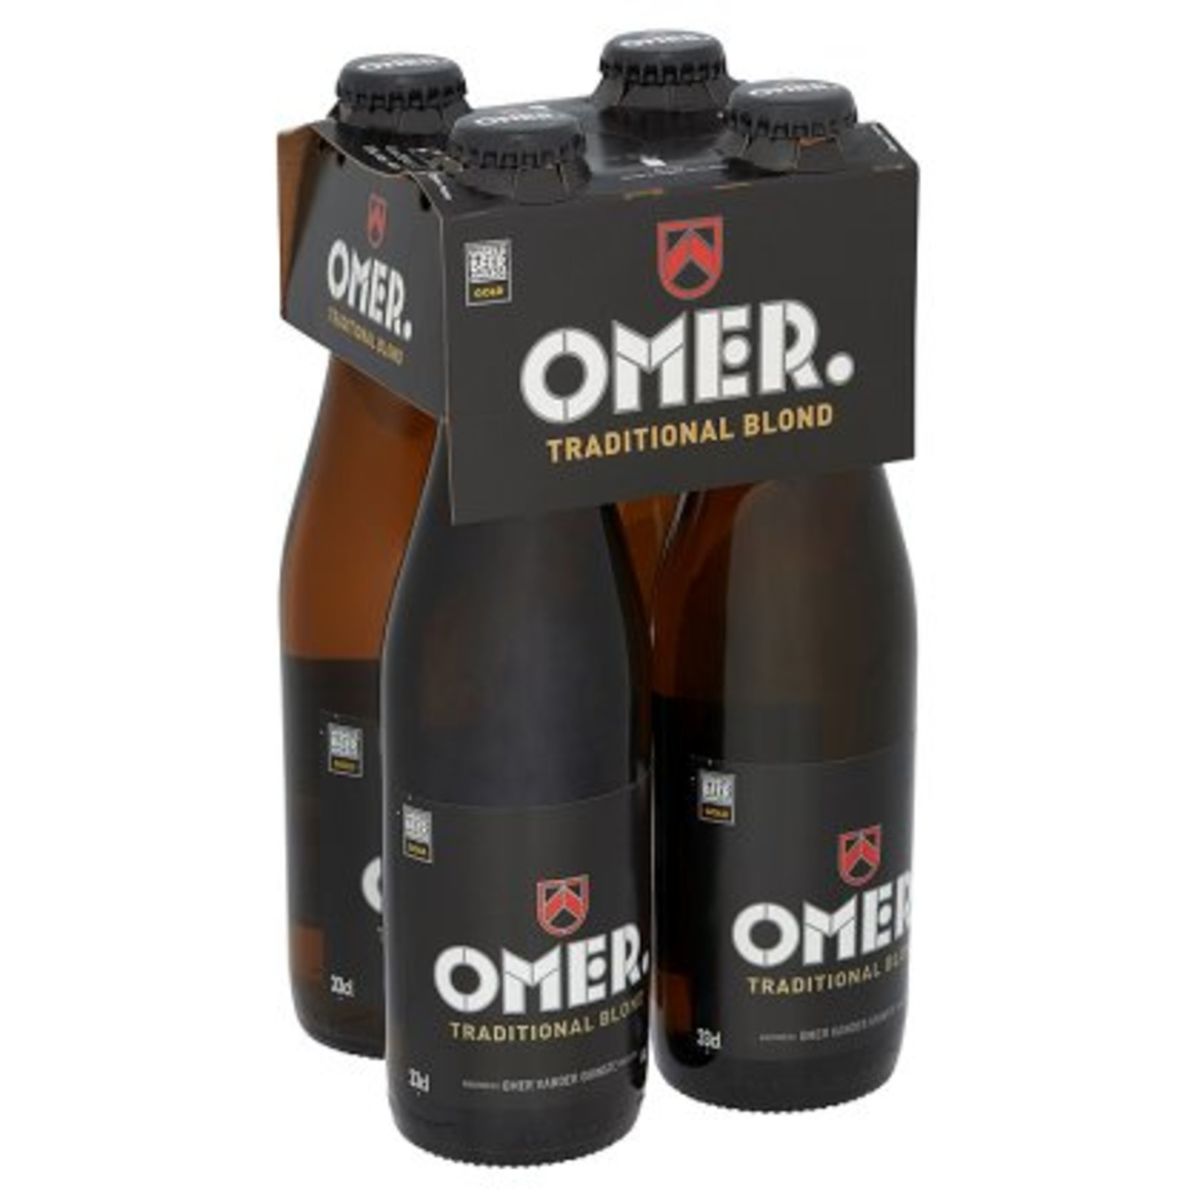 Omer. Traditional Blond Bouteille 4 x 33 cl